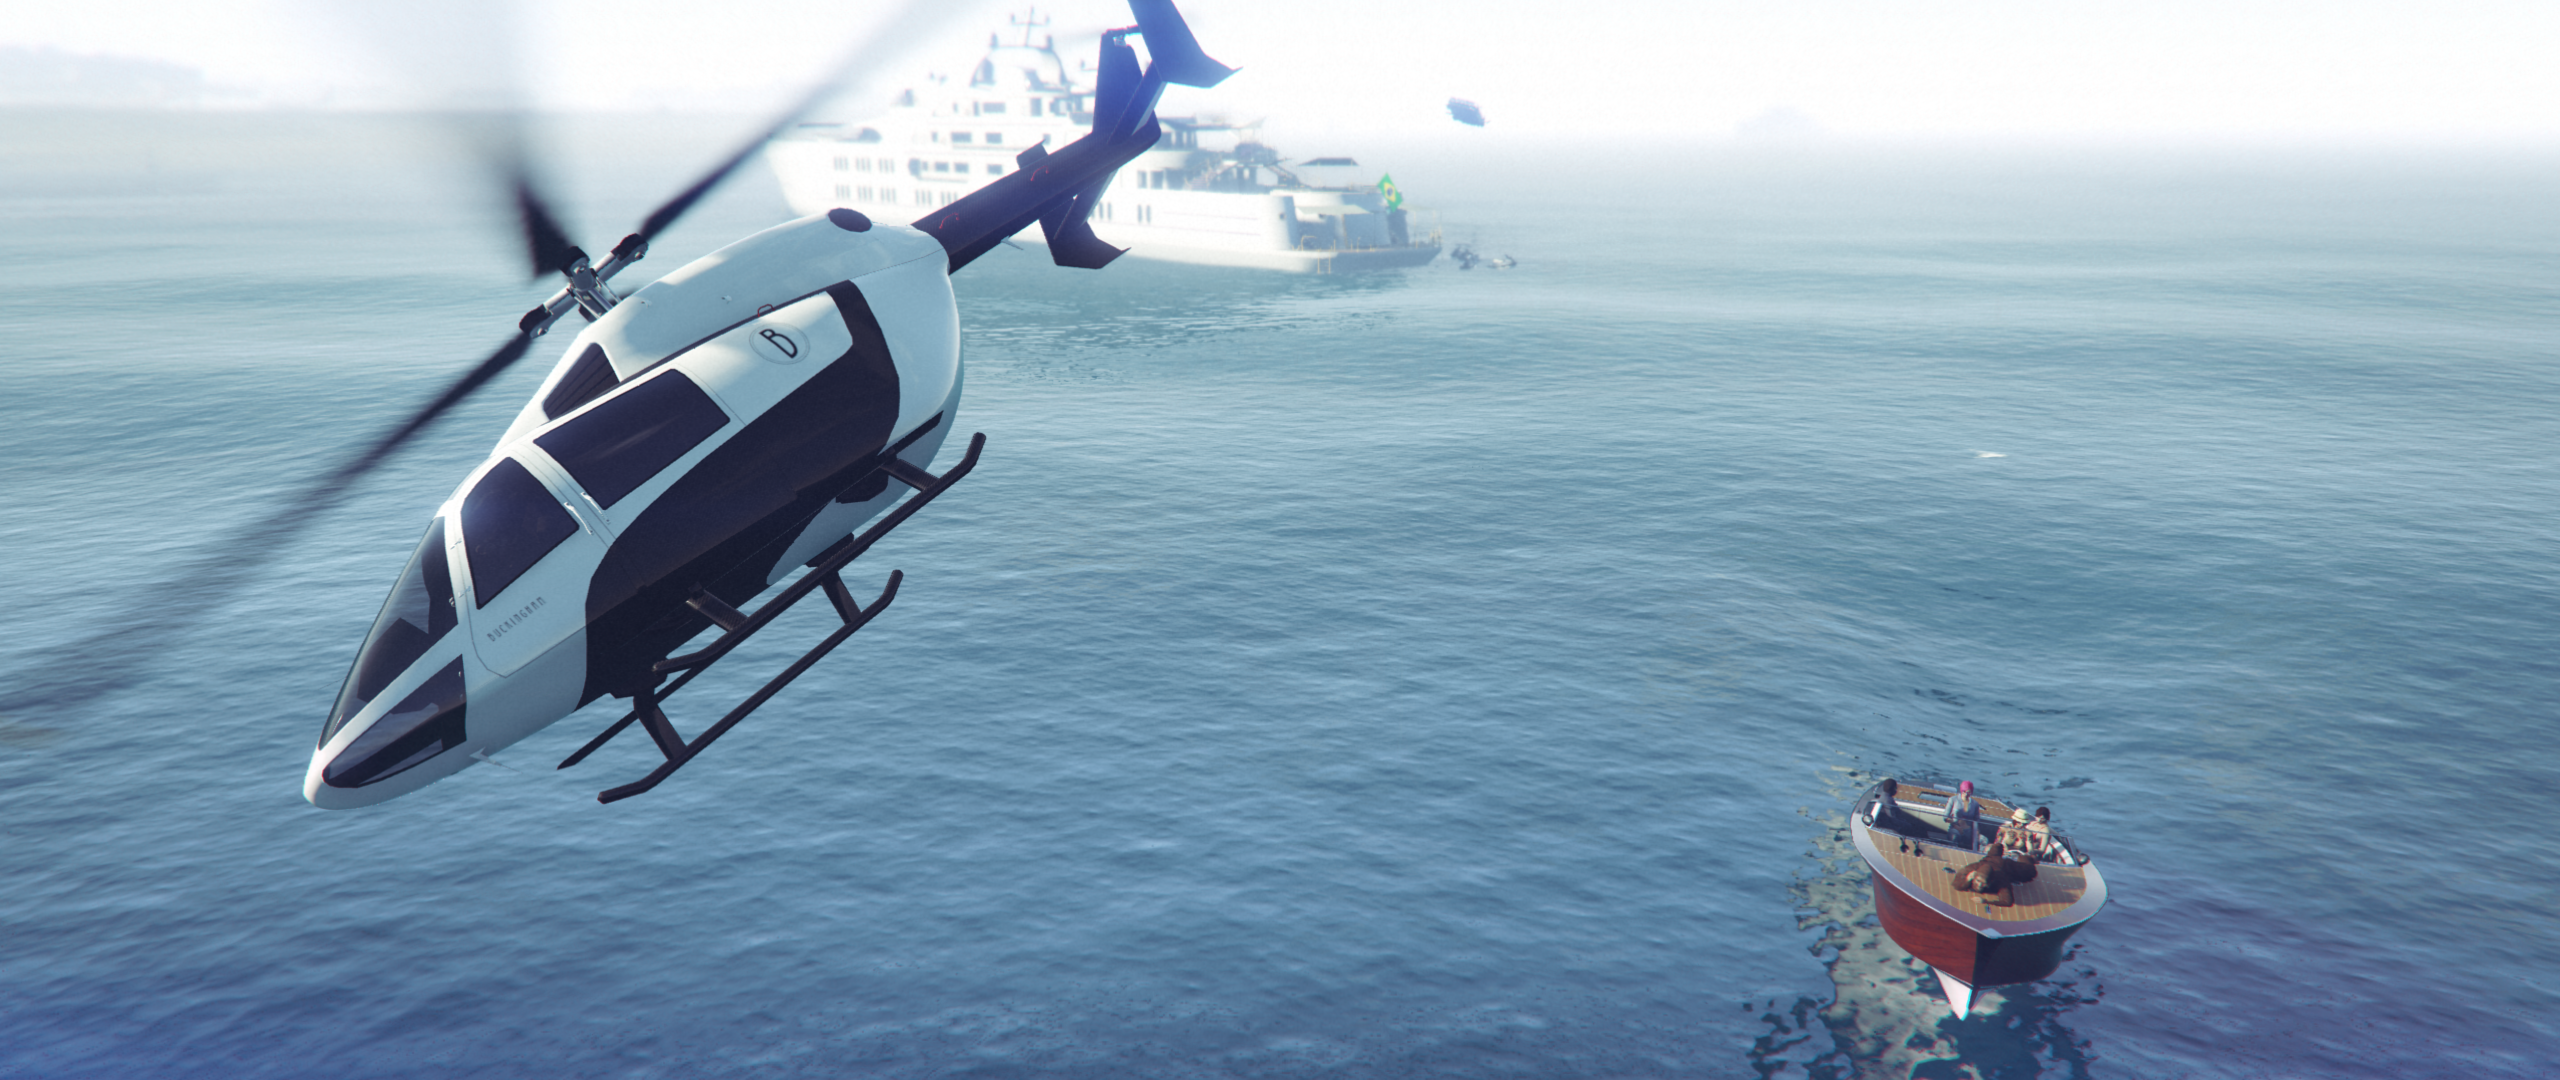 General 2560x1080 Grand Theft Auto V screen shot Grand Theft Auto video games CGI water helicopters aircraft boat video game characters